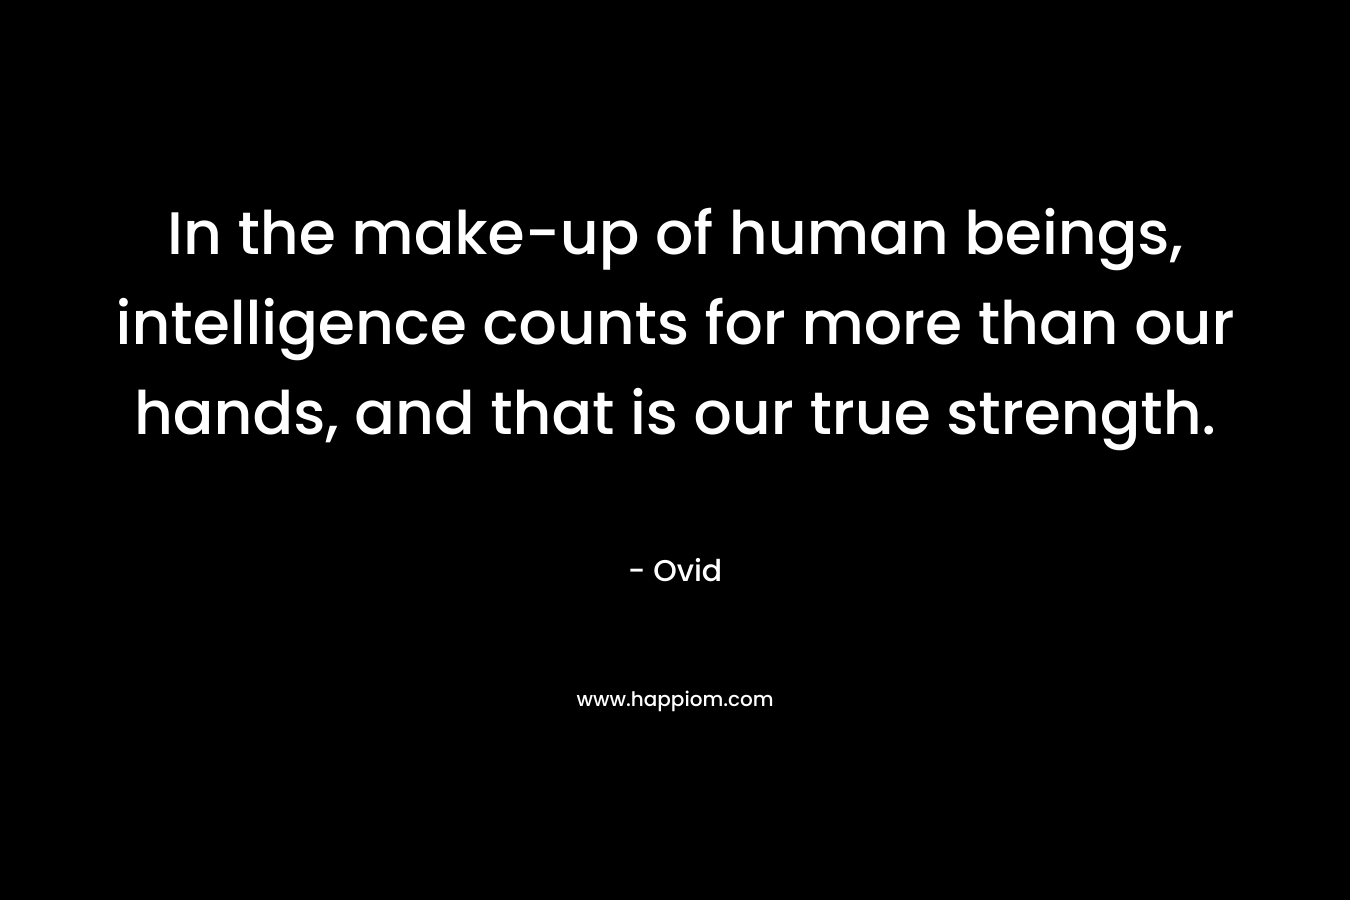 In the make-up of human beings, intelligence counts for more than our hands, and that is our true strength. – Ovid